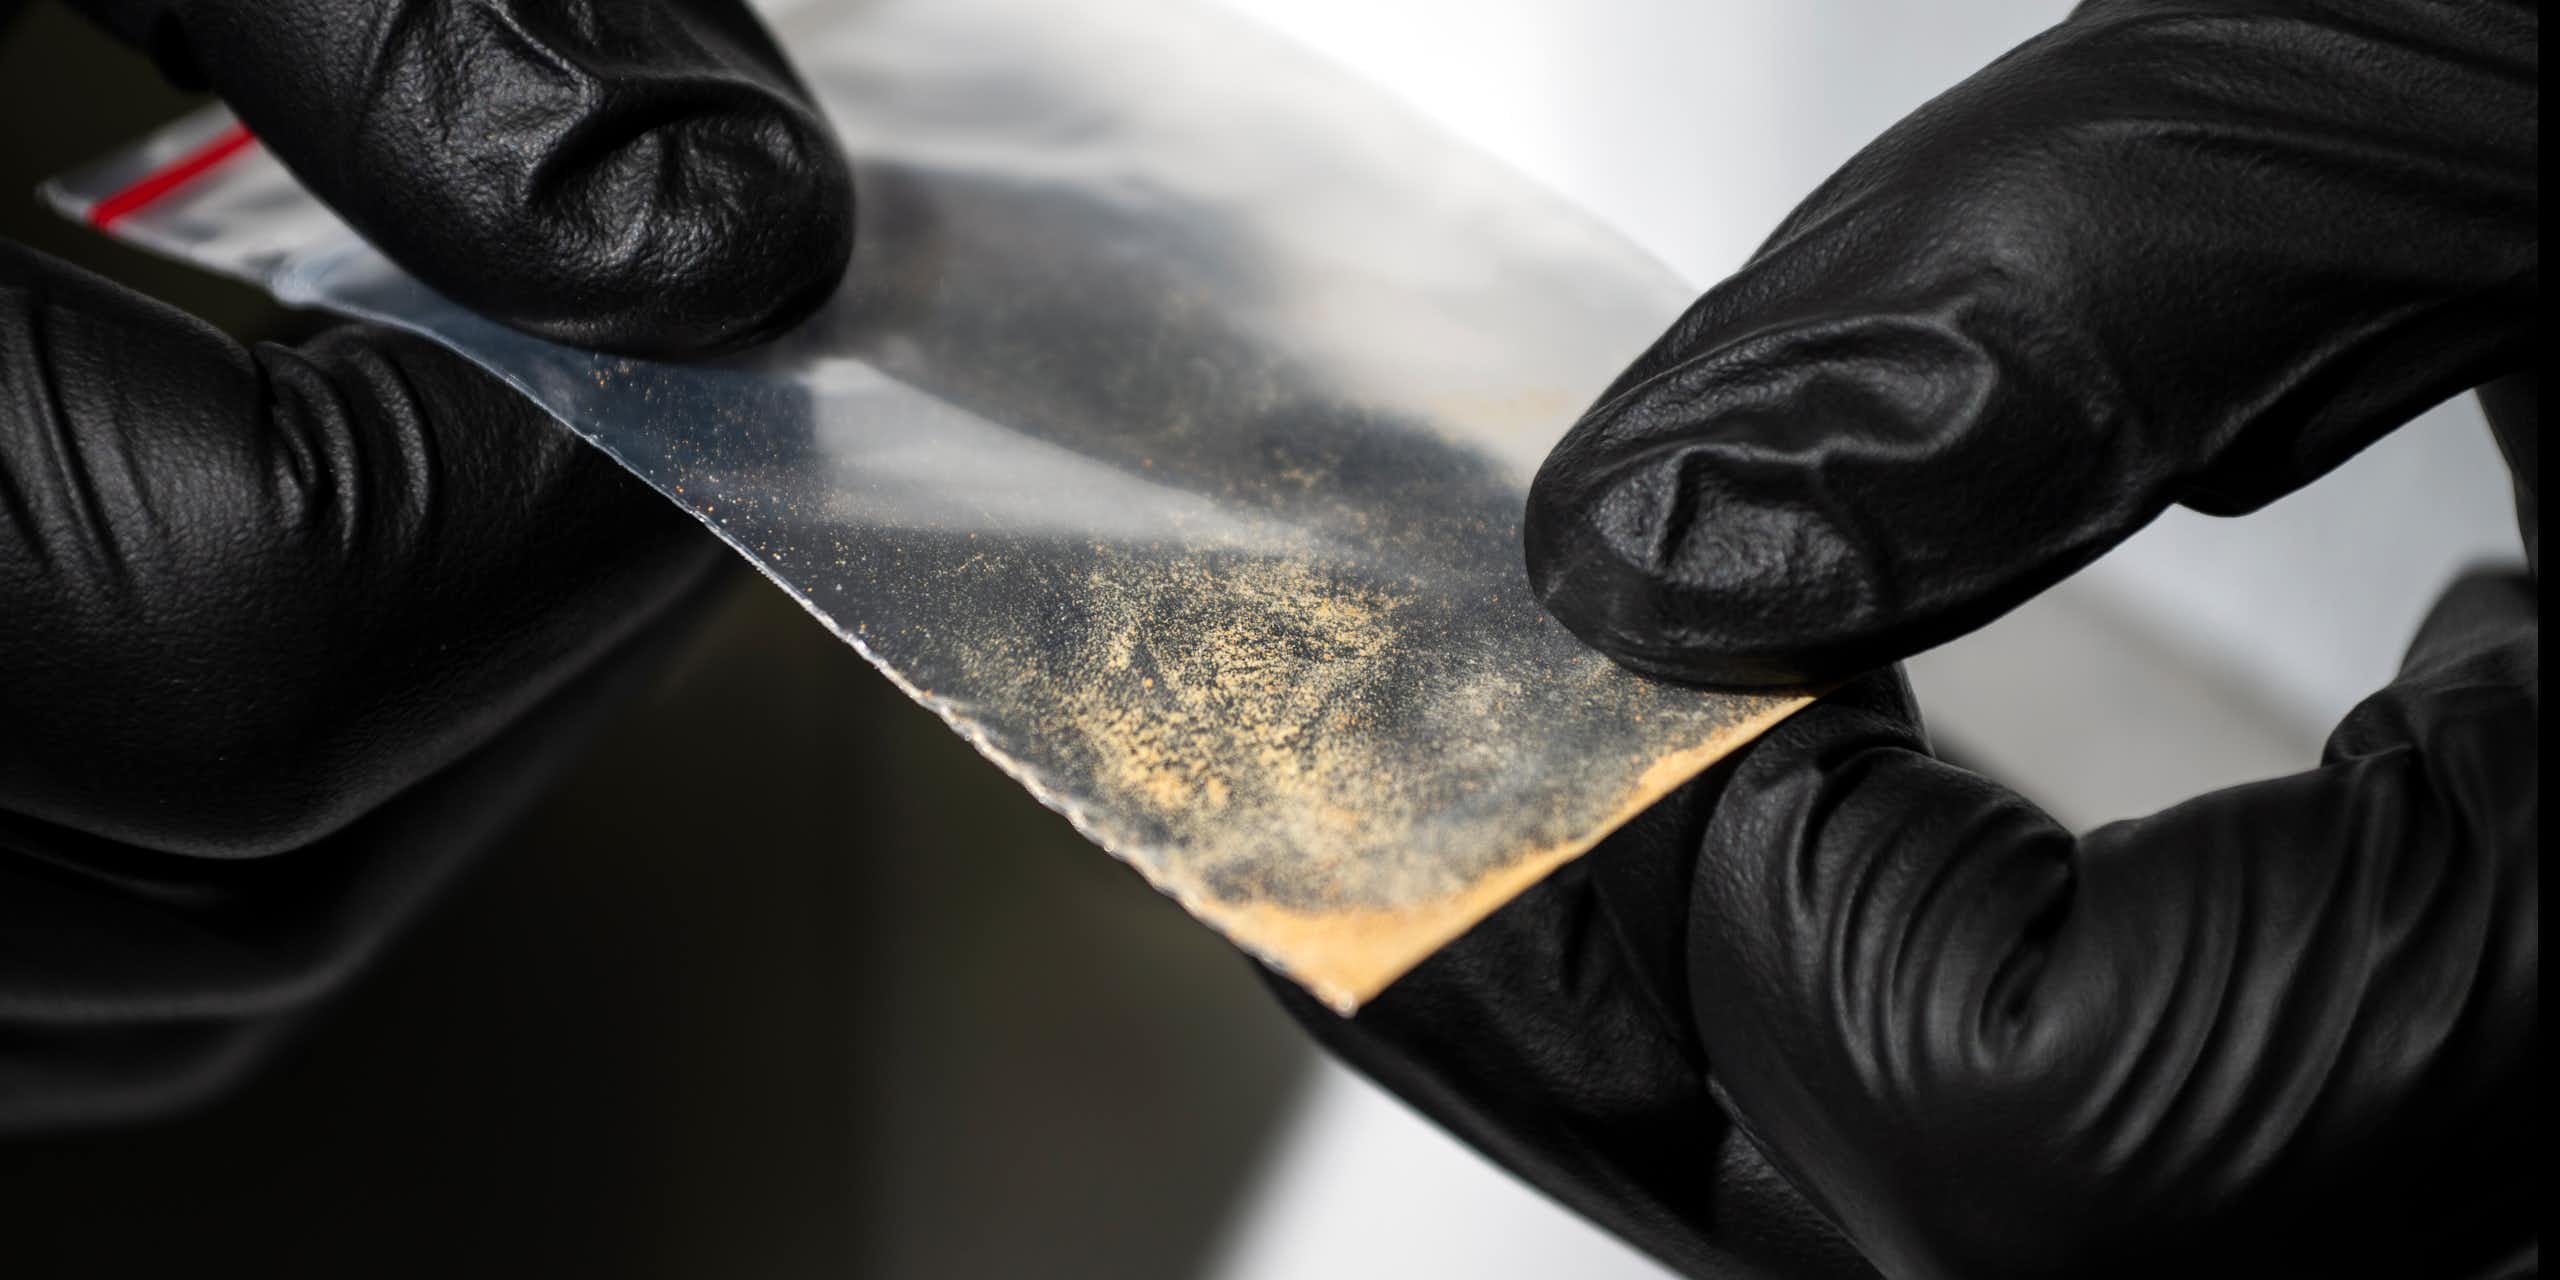 Gloved hands holding small clear packet of brown powder substance